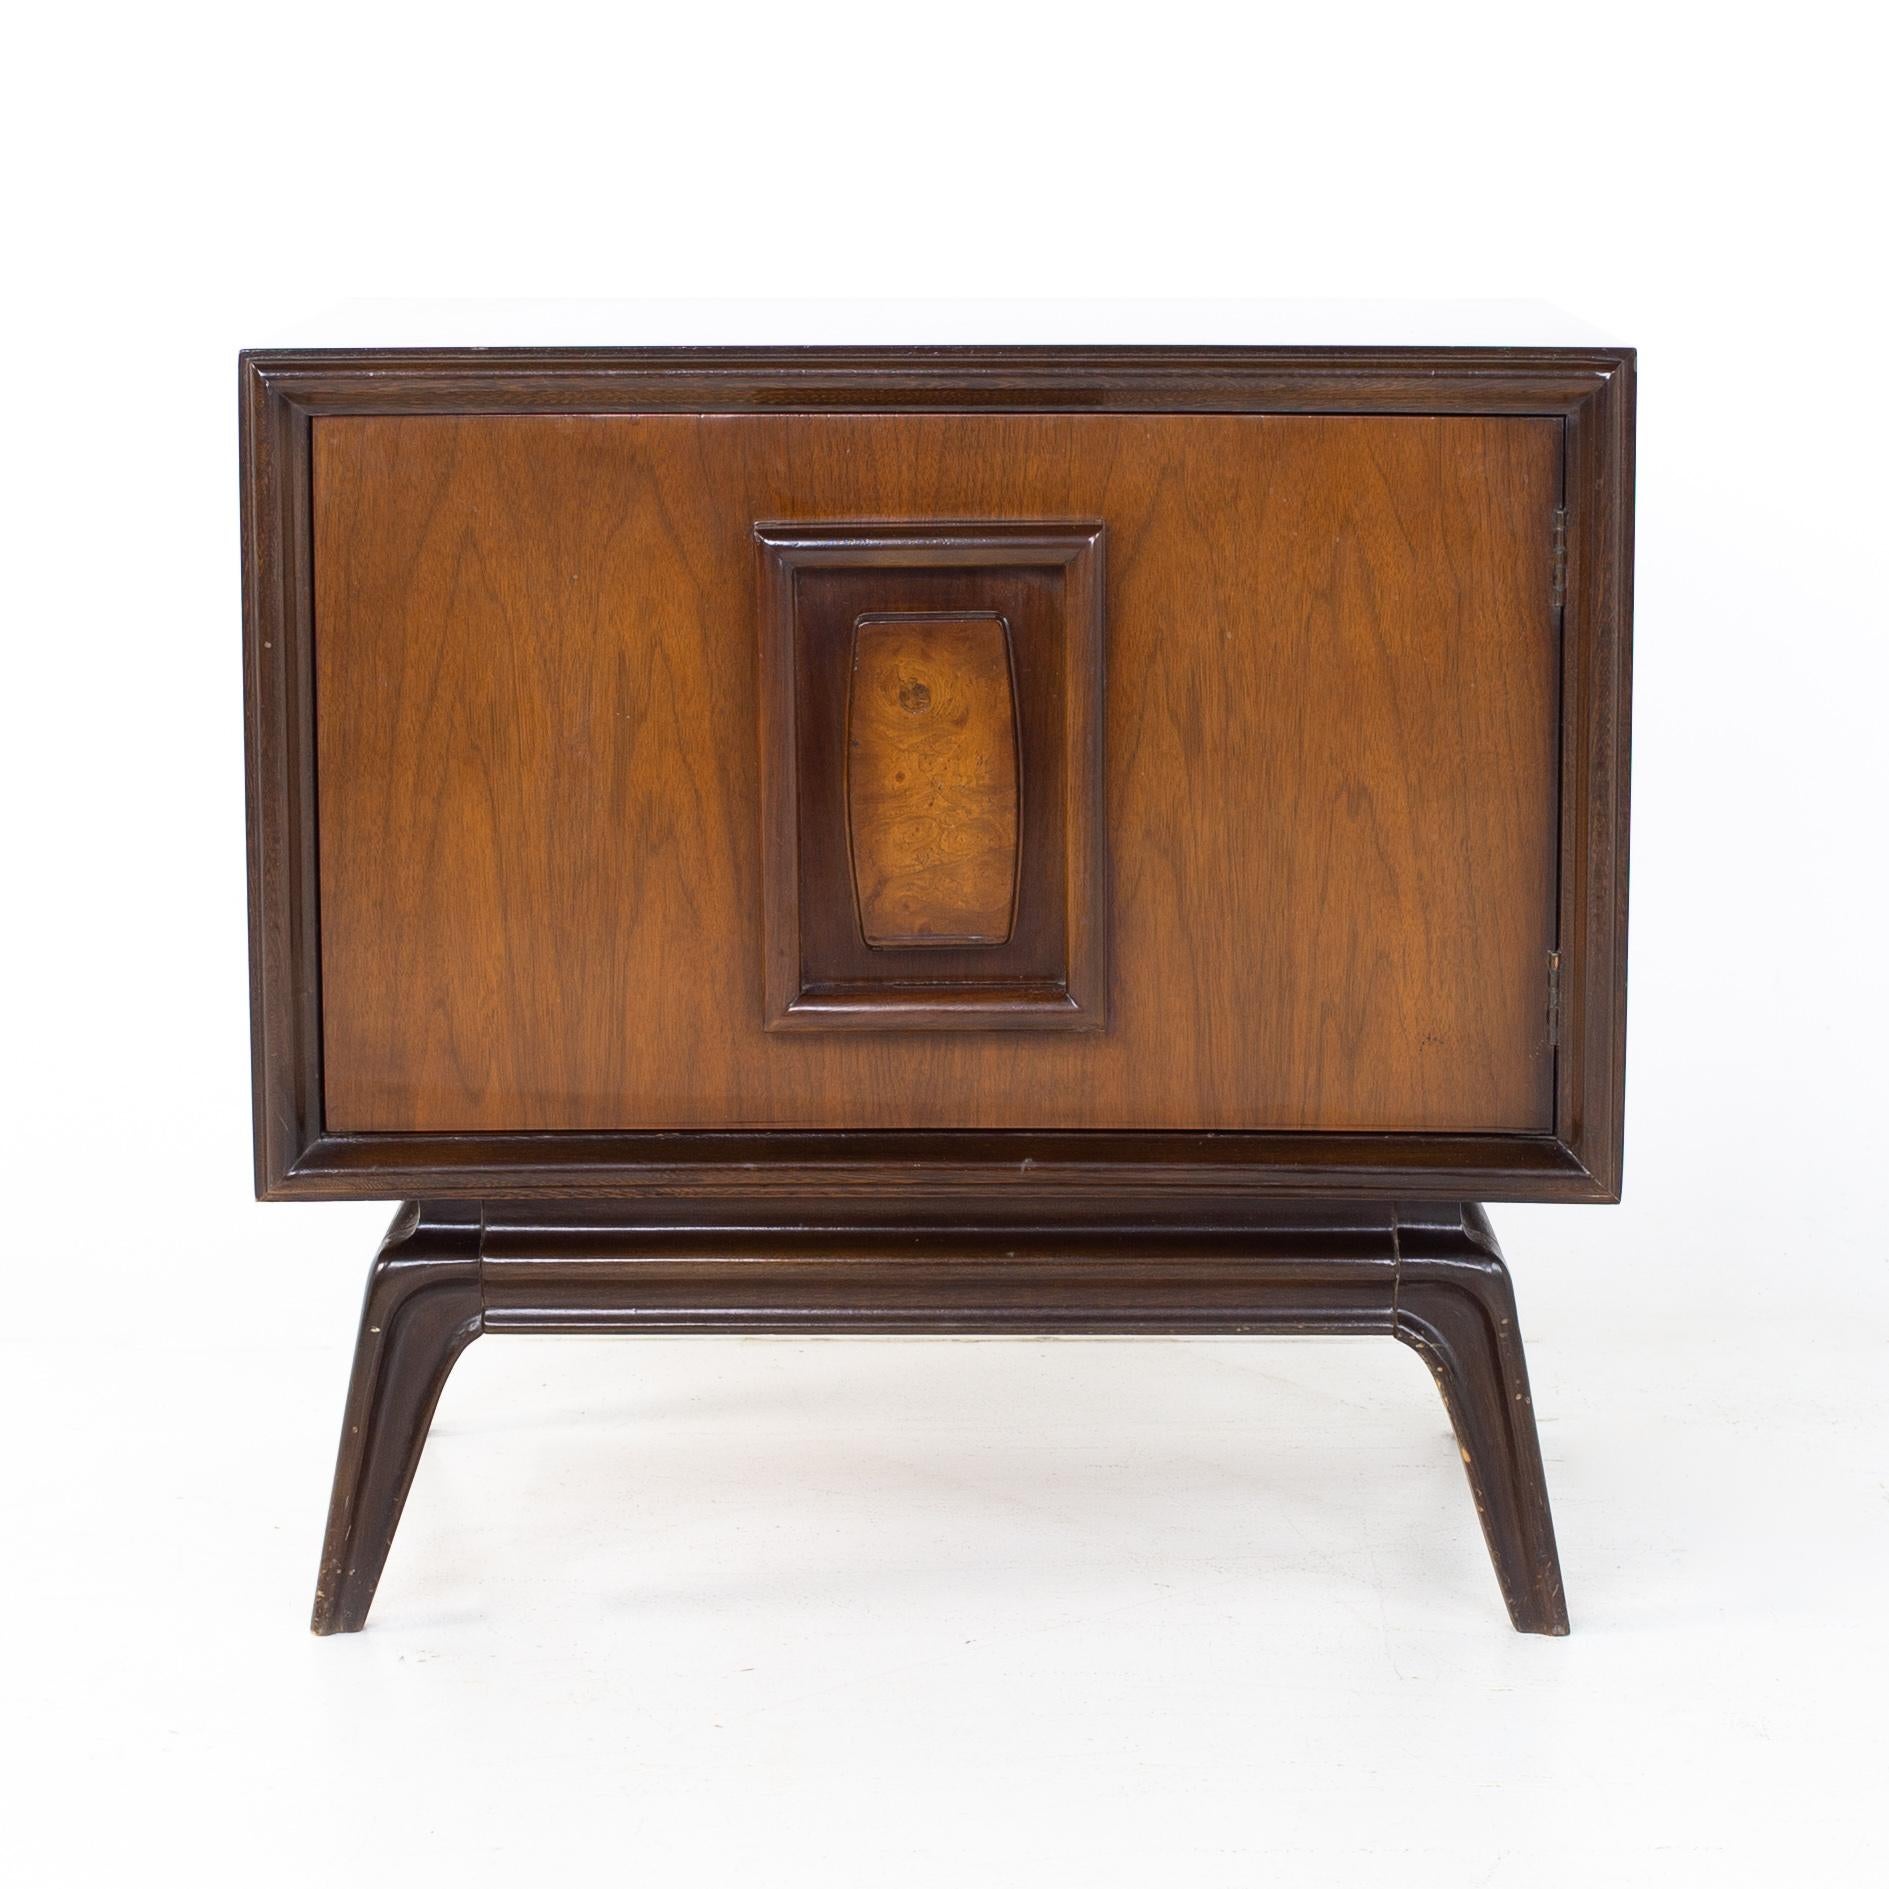 Late 20th Century Hoke Wood Products Mid Century Walnut and Burlwood Nightstands, a Pair